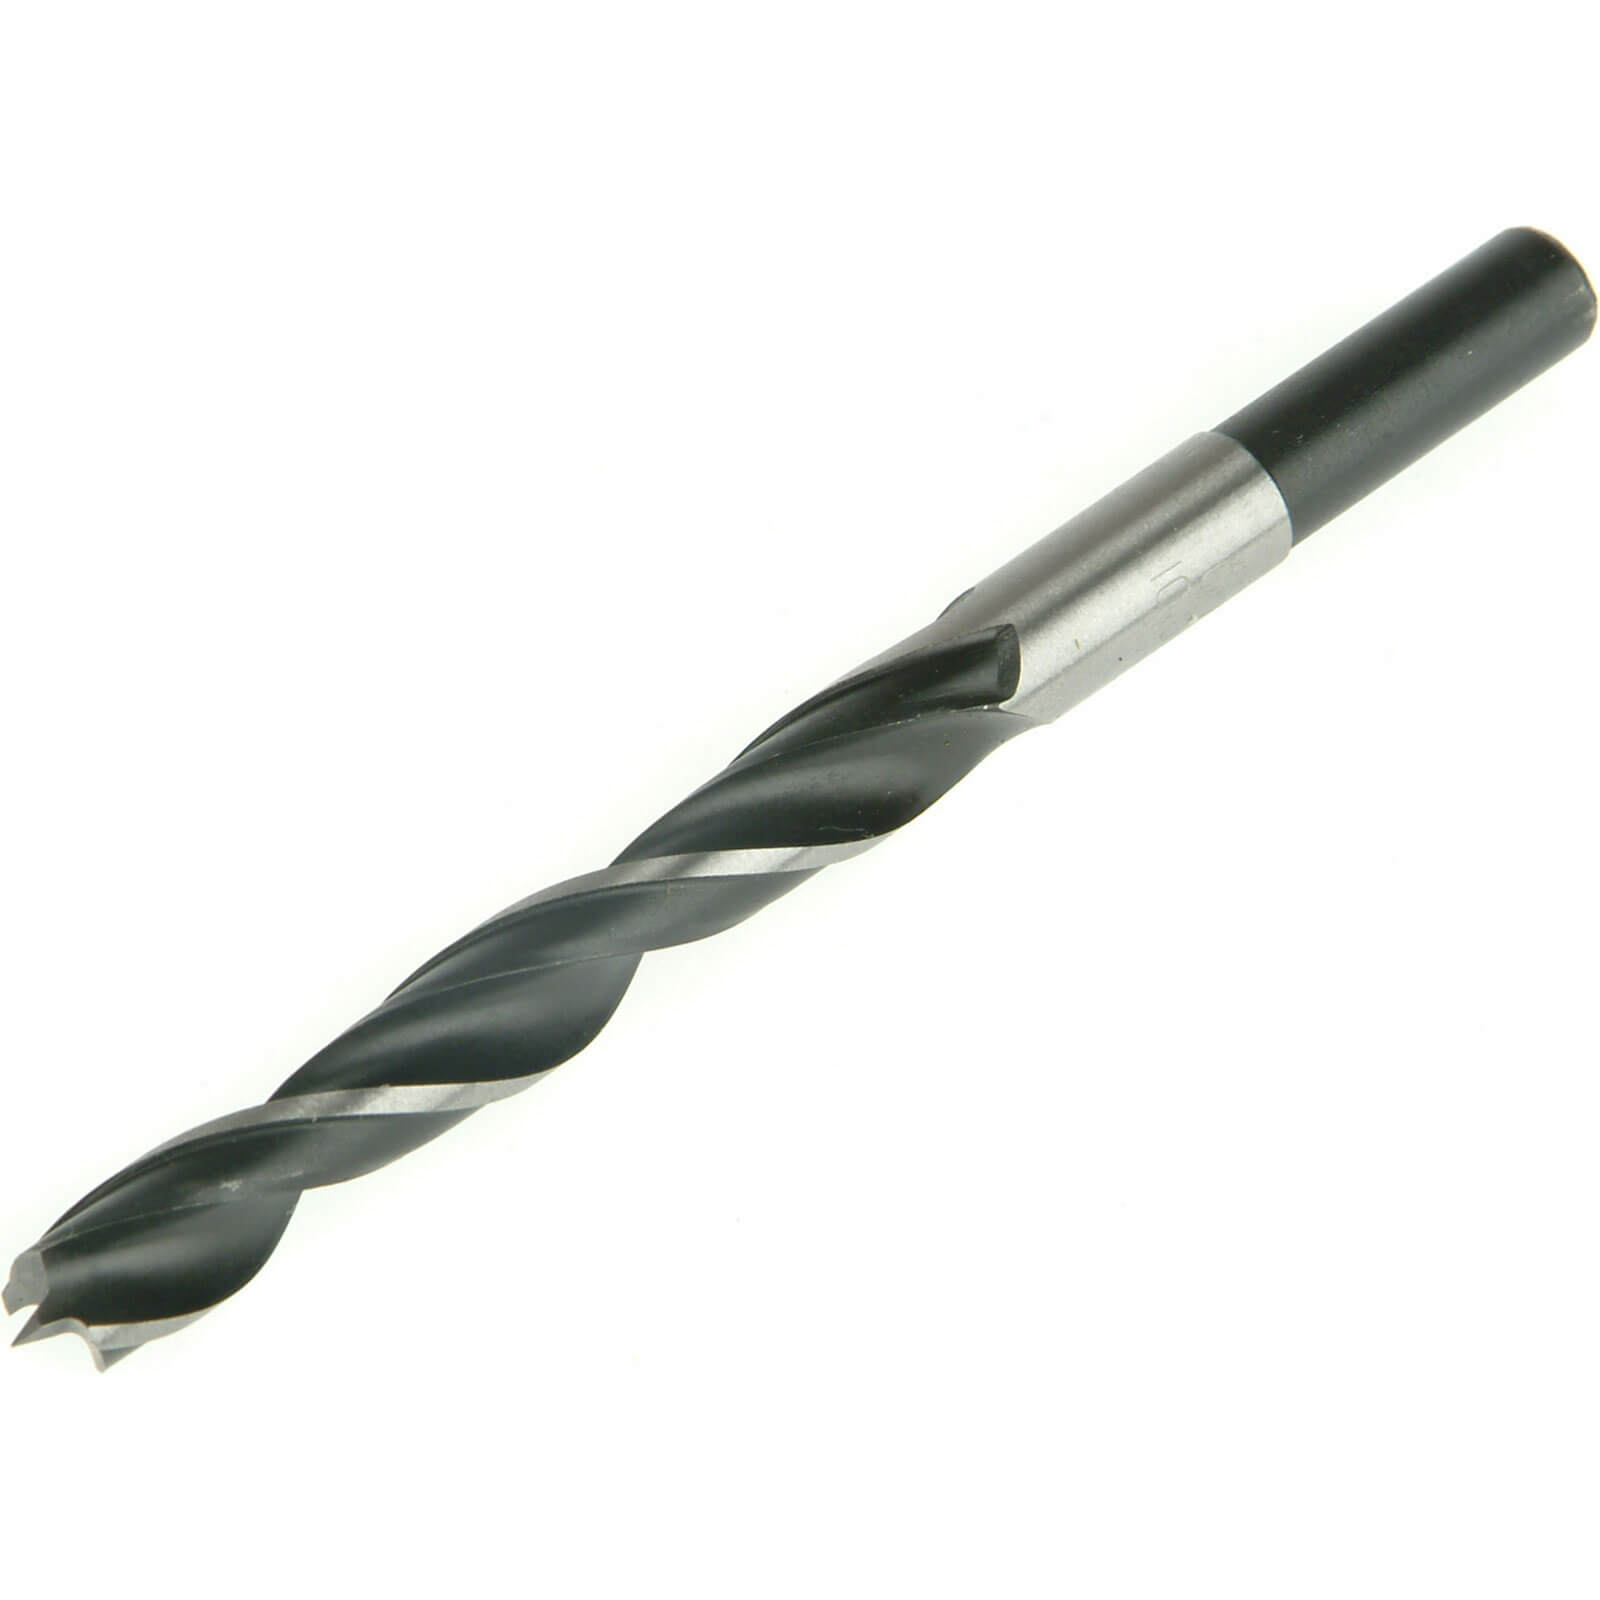 Photo of Faithfull Lip And Spur Wood Drill Bit 12mm